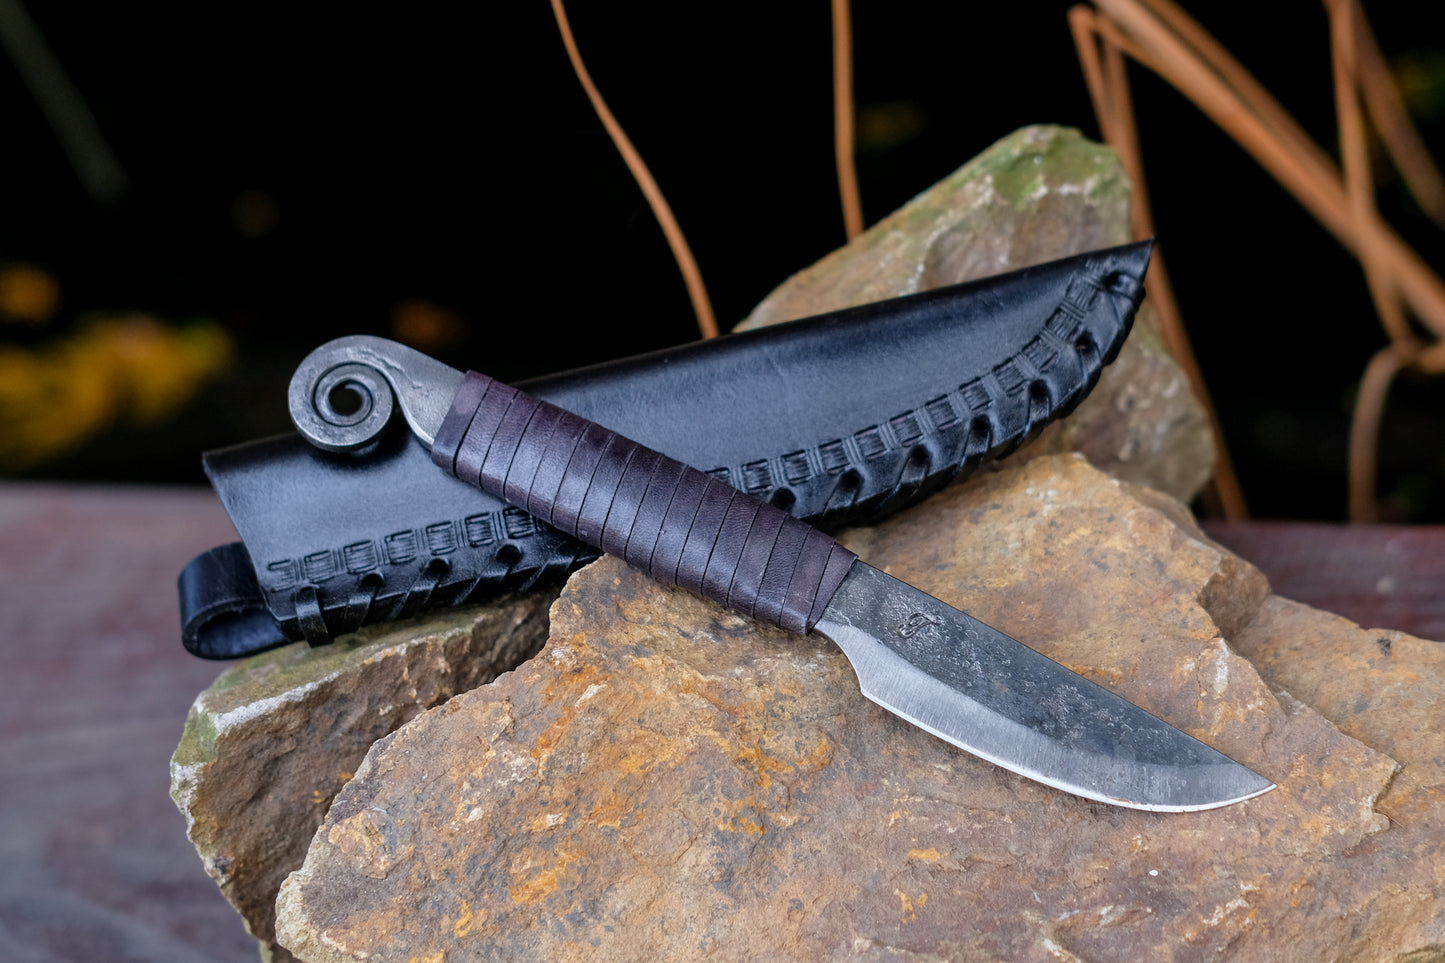 Forged Celtic knife Snail (small) with scabbard